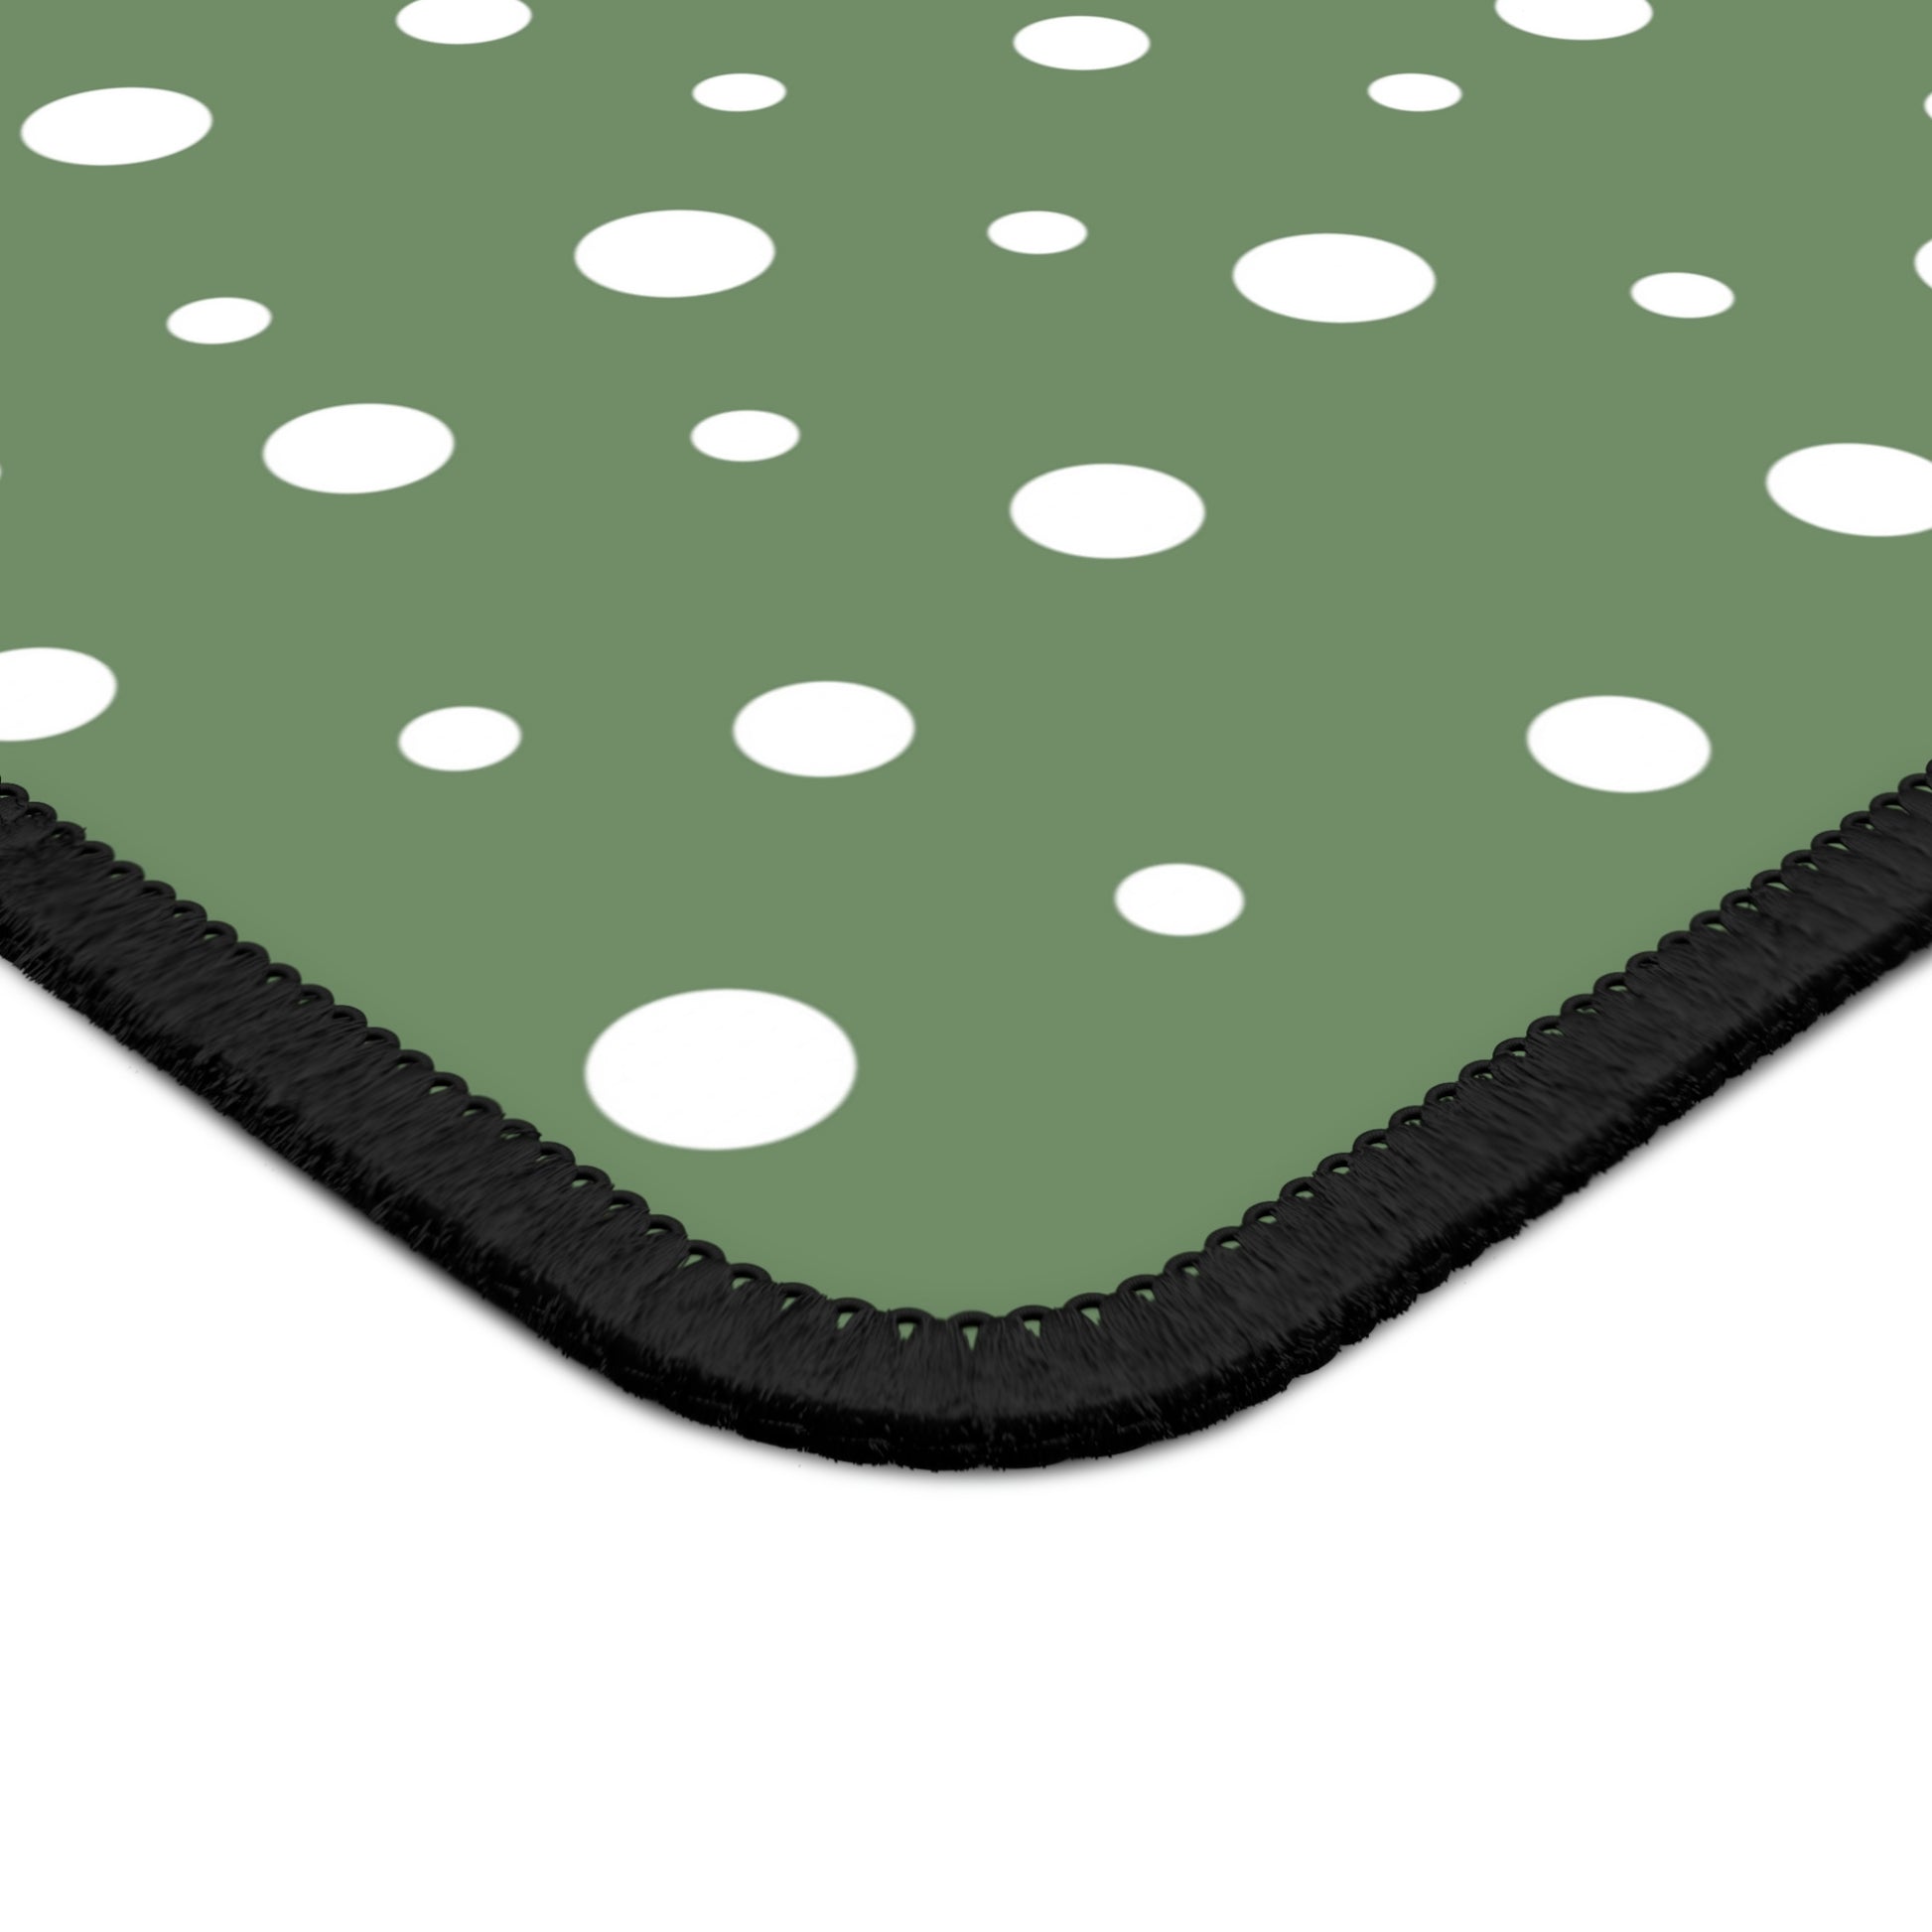 White Dots & Sage Green Gaming Mouse Pad - Desk Cookies